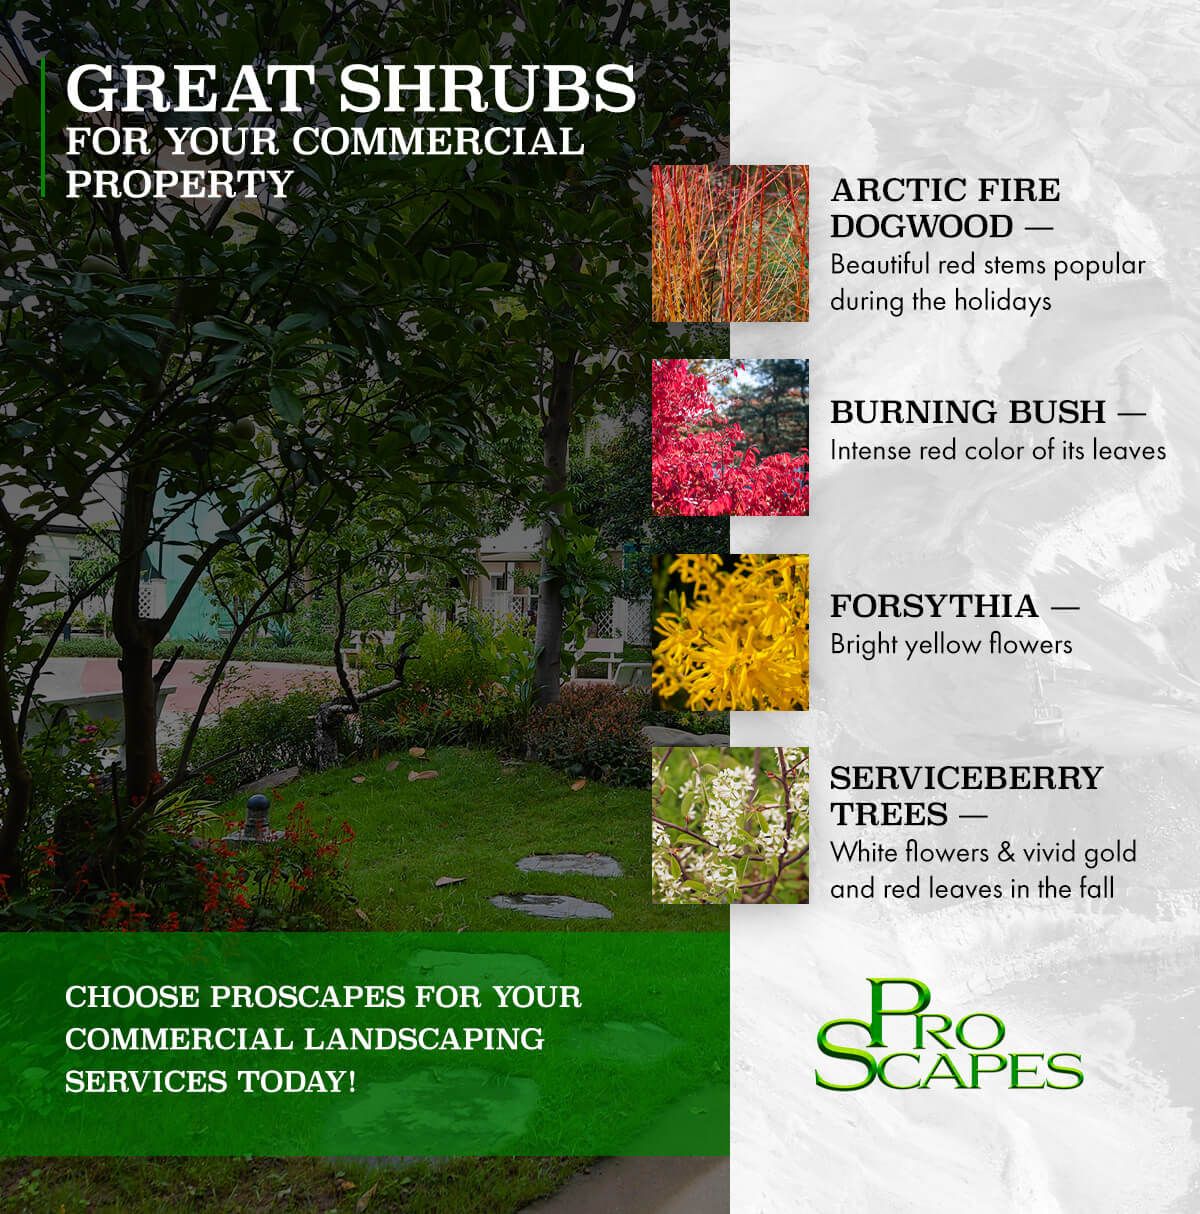 Great Shrubs For Your Commercial Property